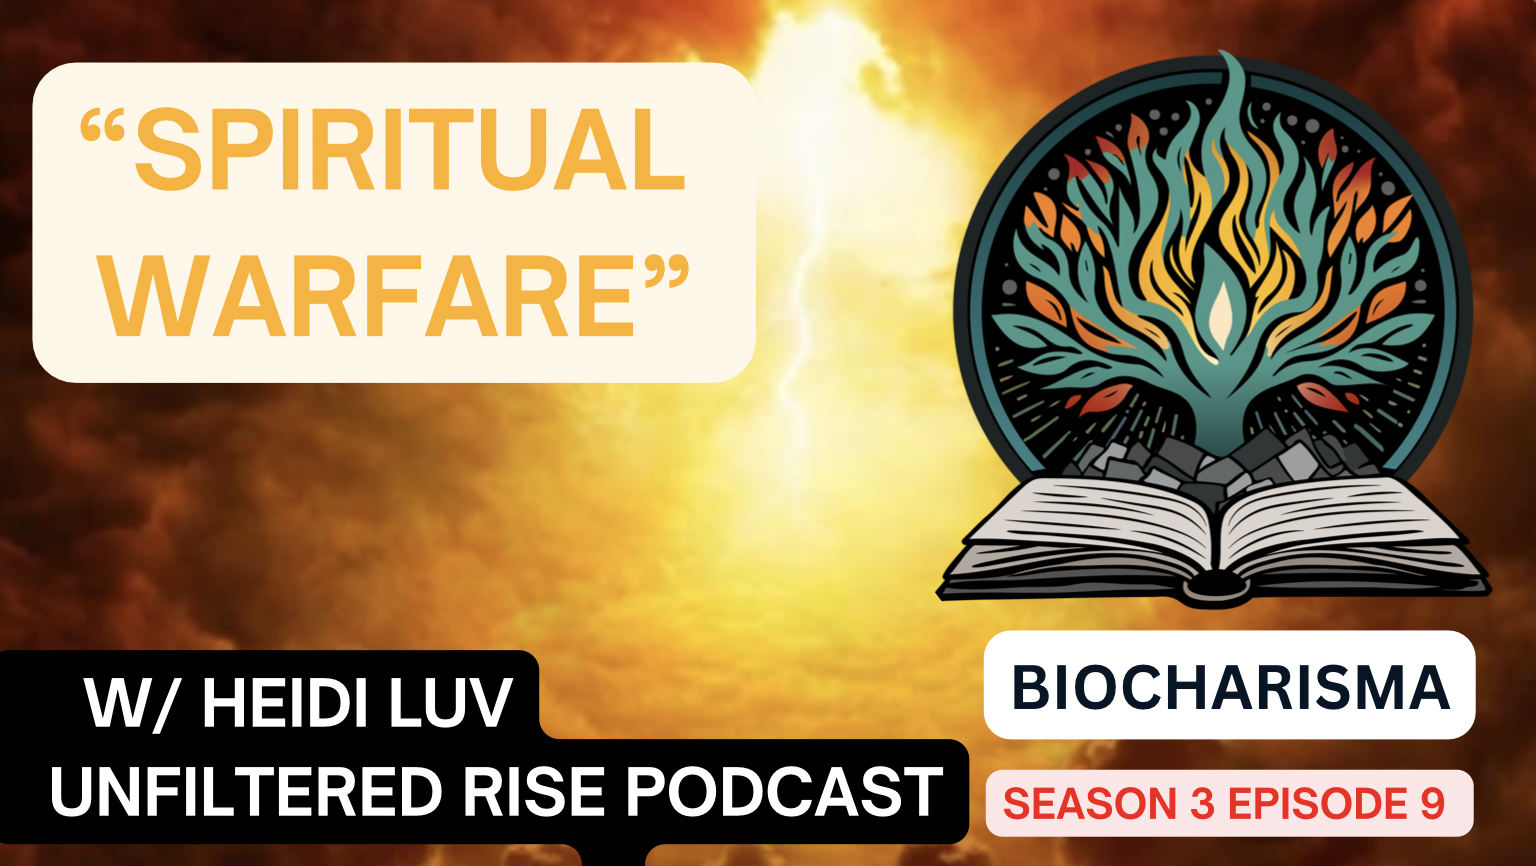 “Spiritual Warfare” with Heidi Luv of the Unfiltered Rise Podcast